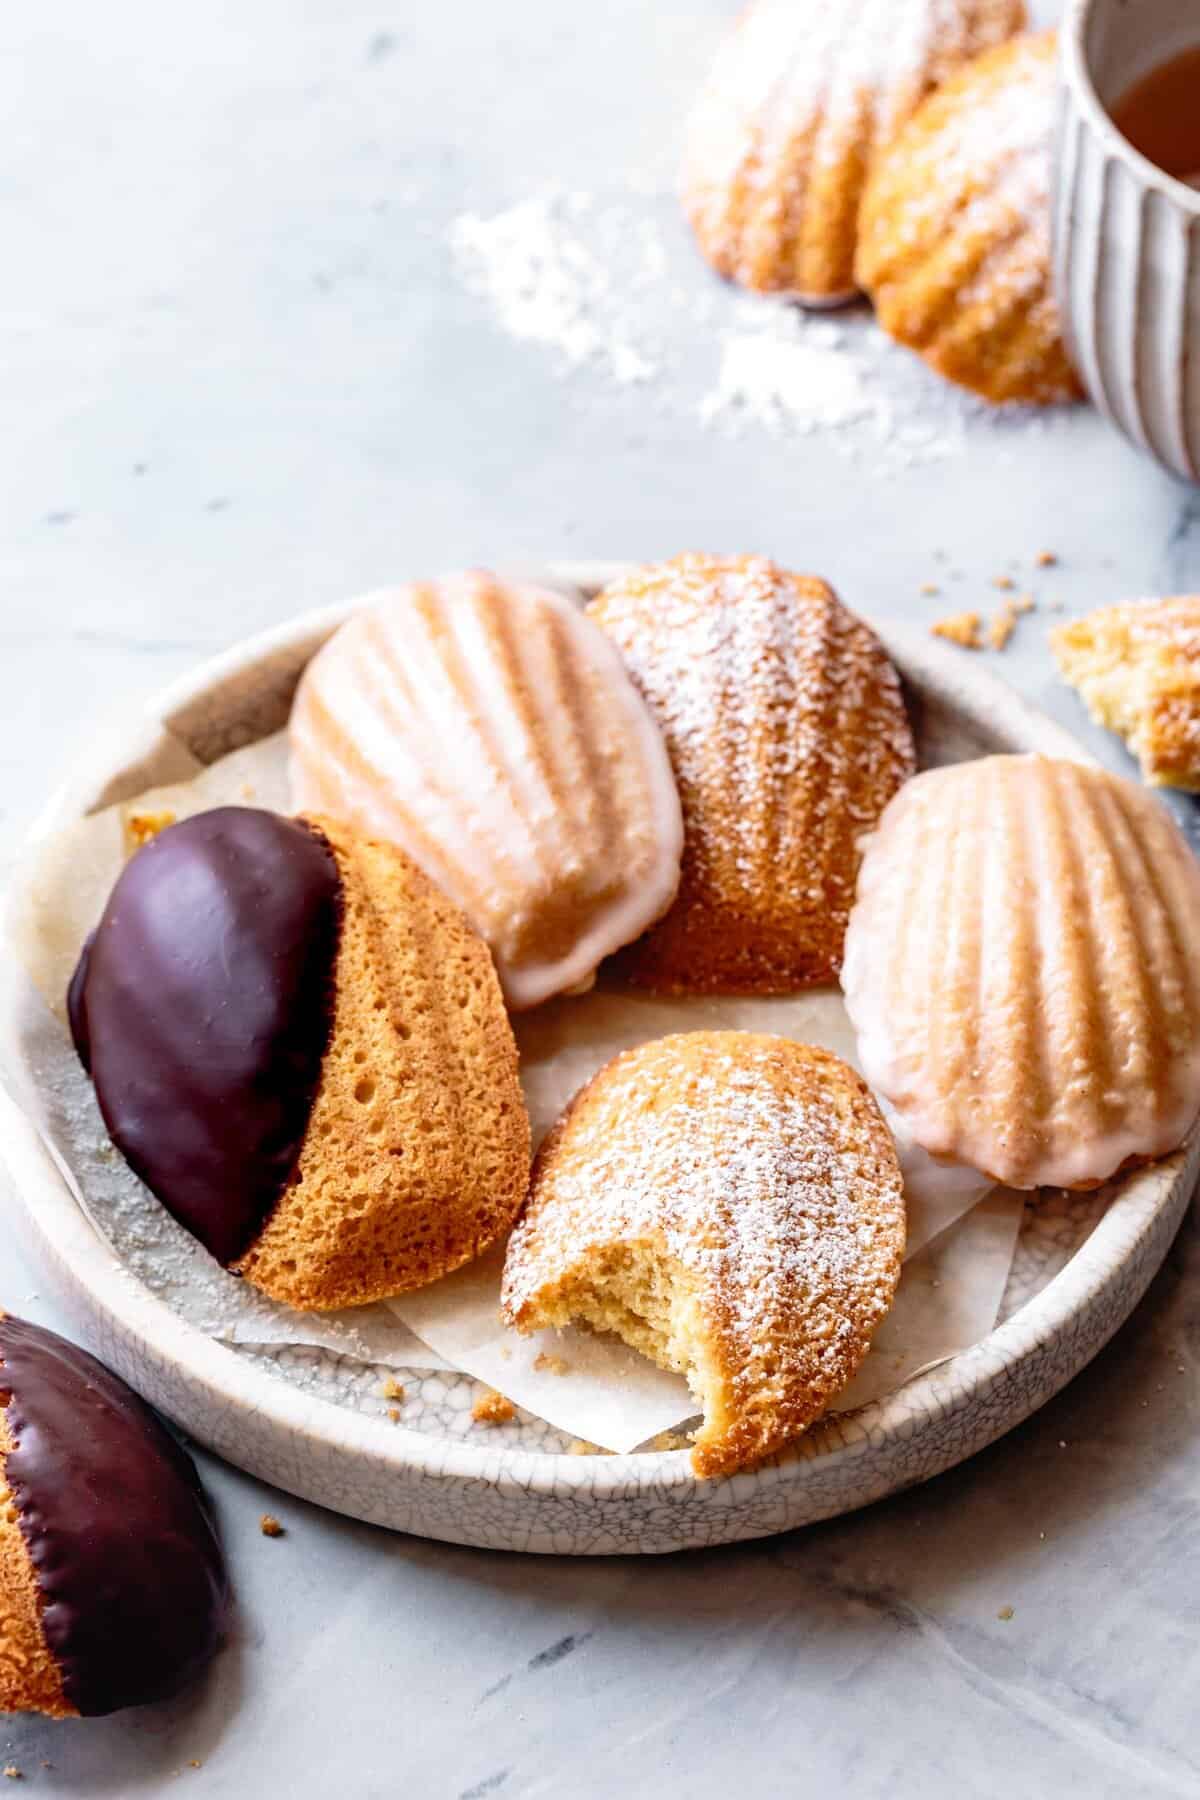 five GF madeleines on a plate with different toppings (chocolate, lemon glaze, and powdered sugar), one with a bite taken out to show the spongey interior